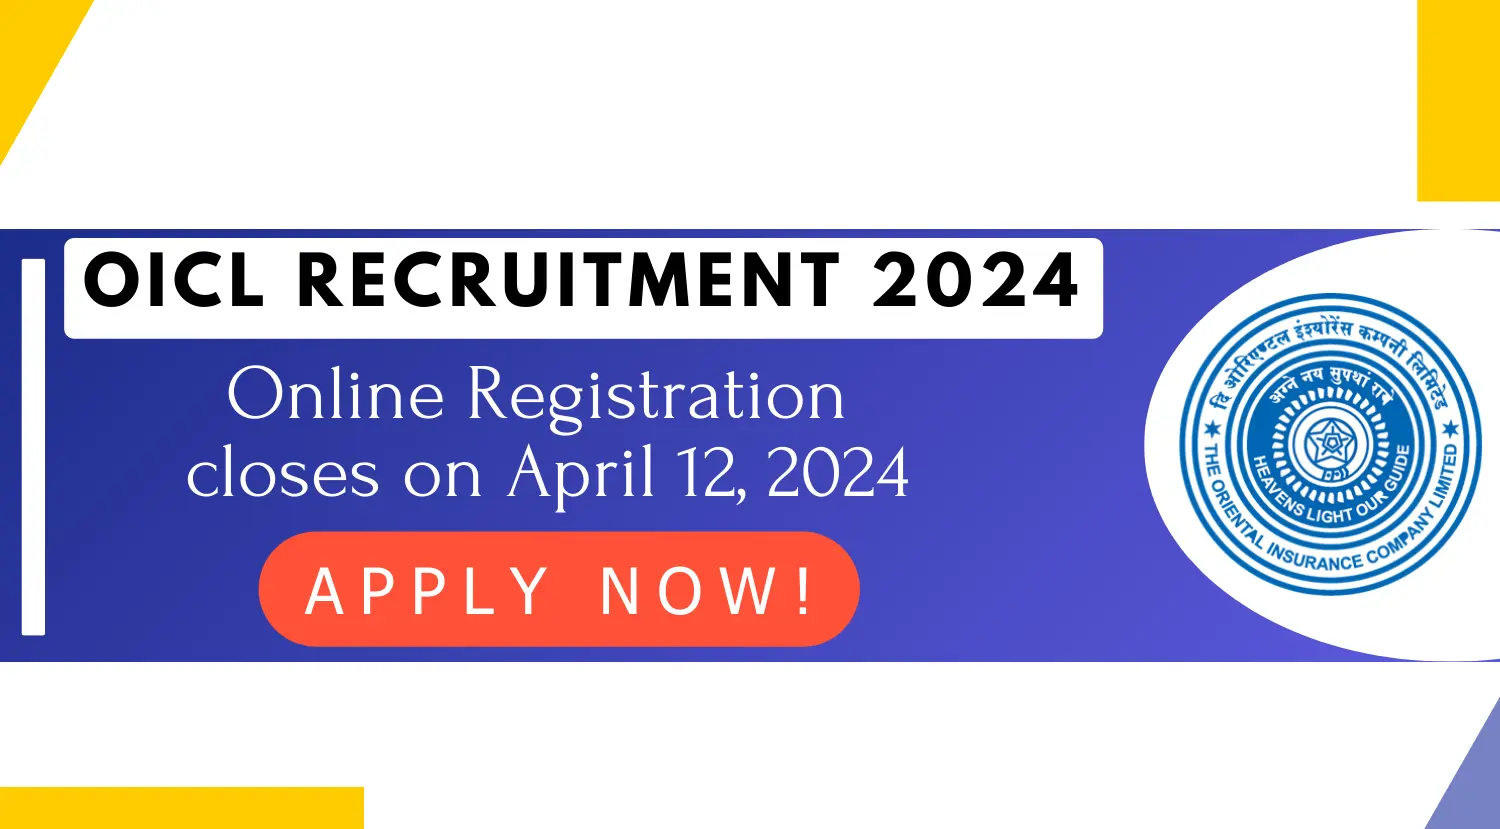 OICL Recruitment 2024 online registration closes on April 12 Apply Now